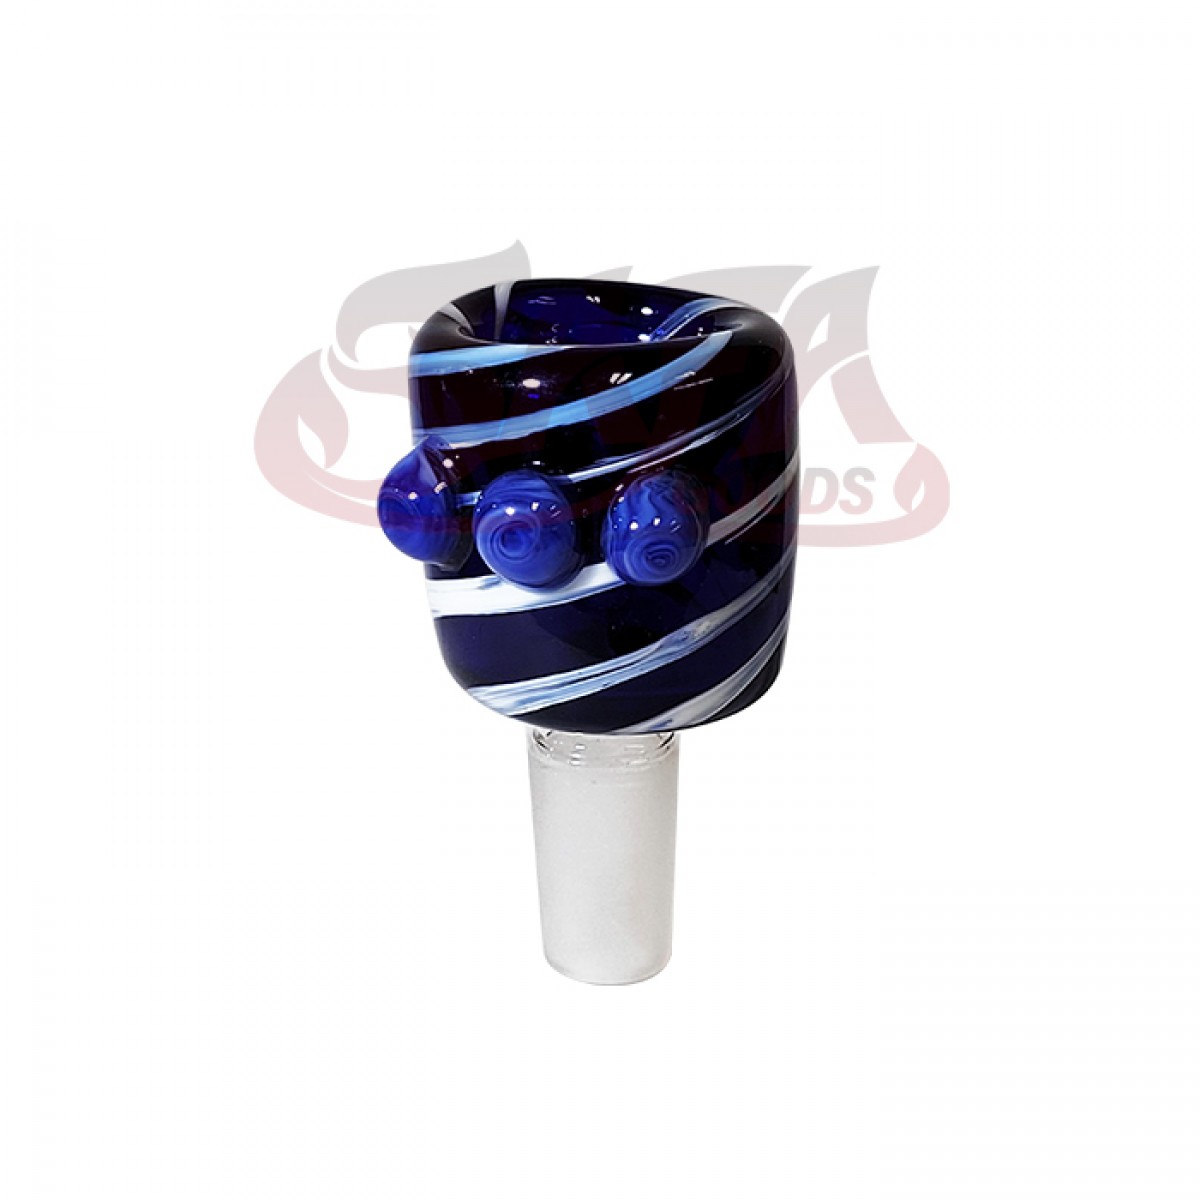 14mm Glass Bowl Attachment with Spiral Design